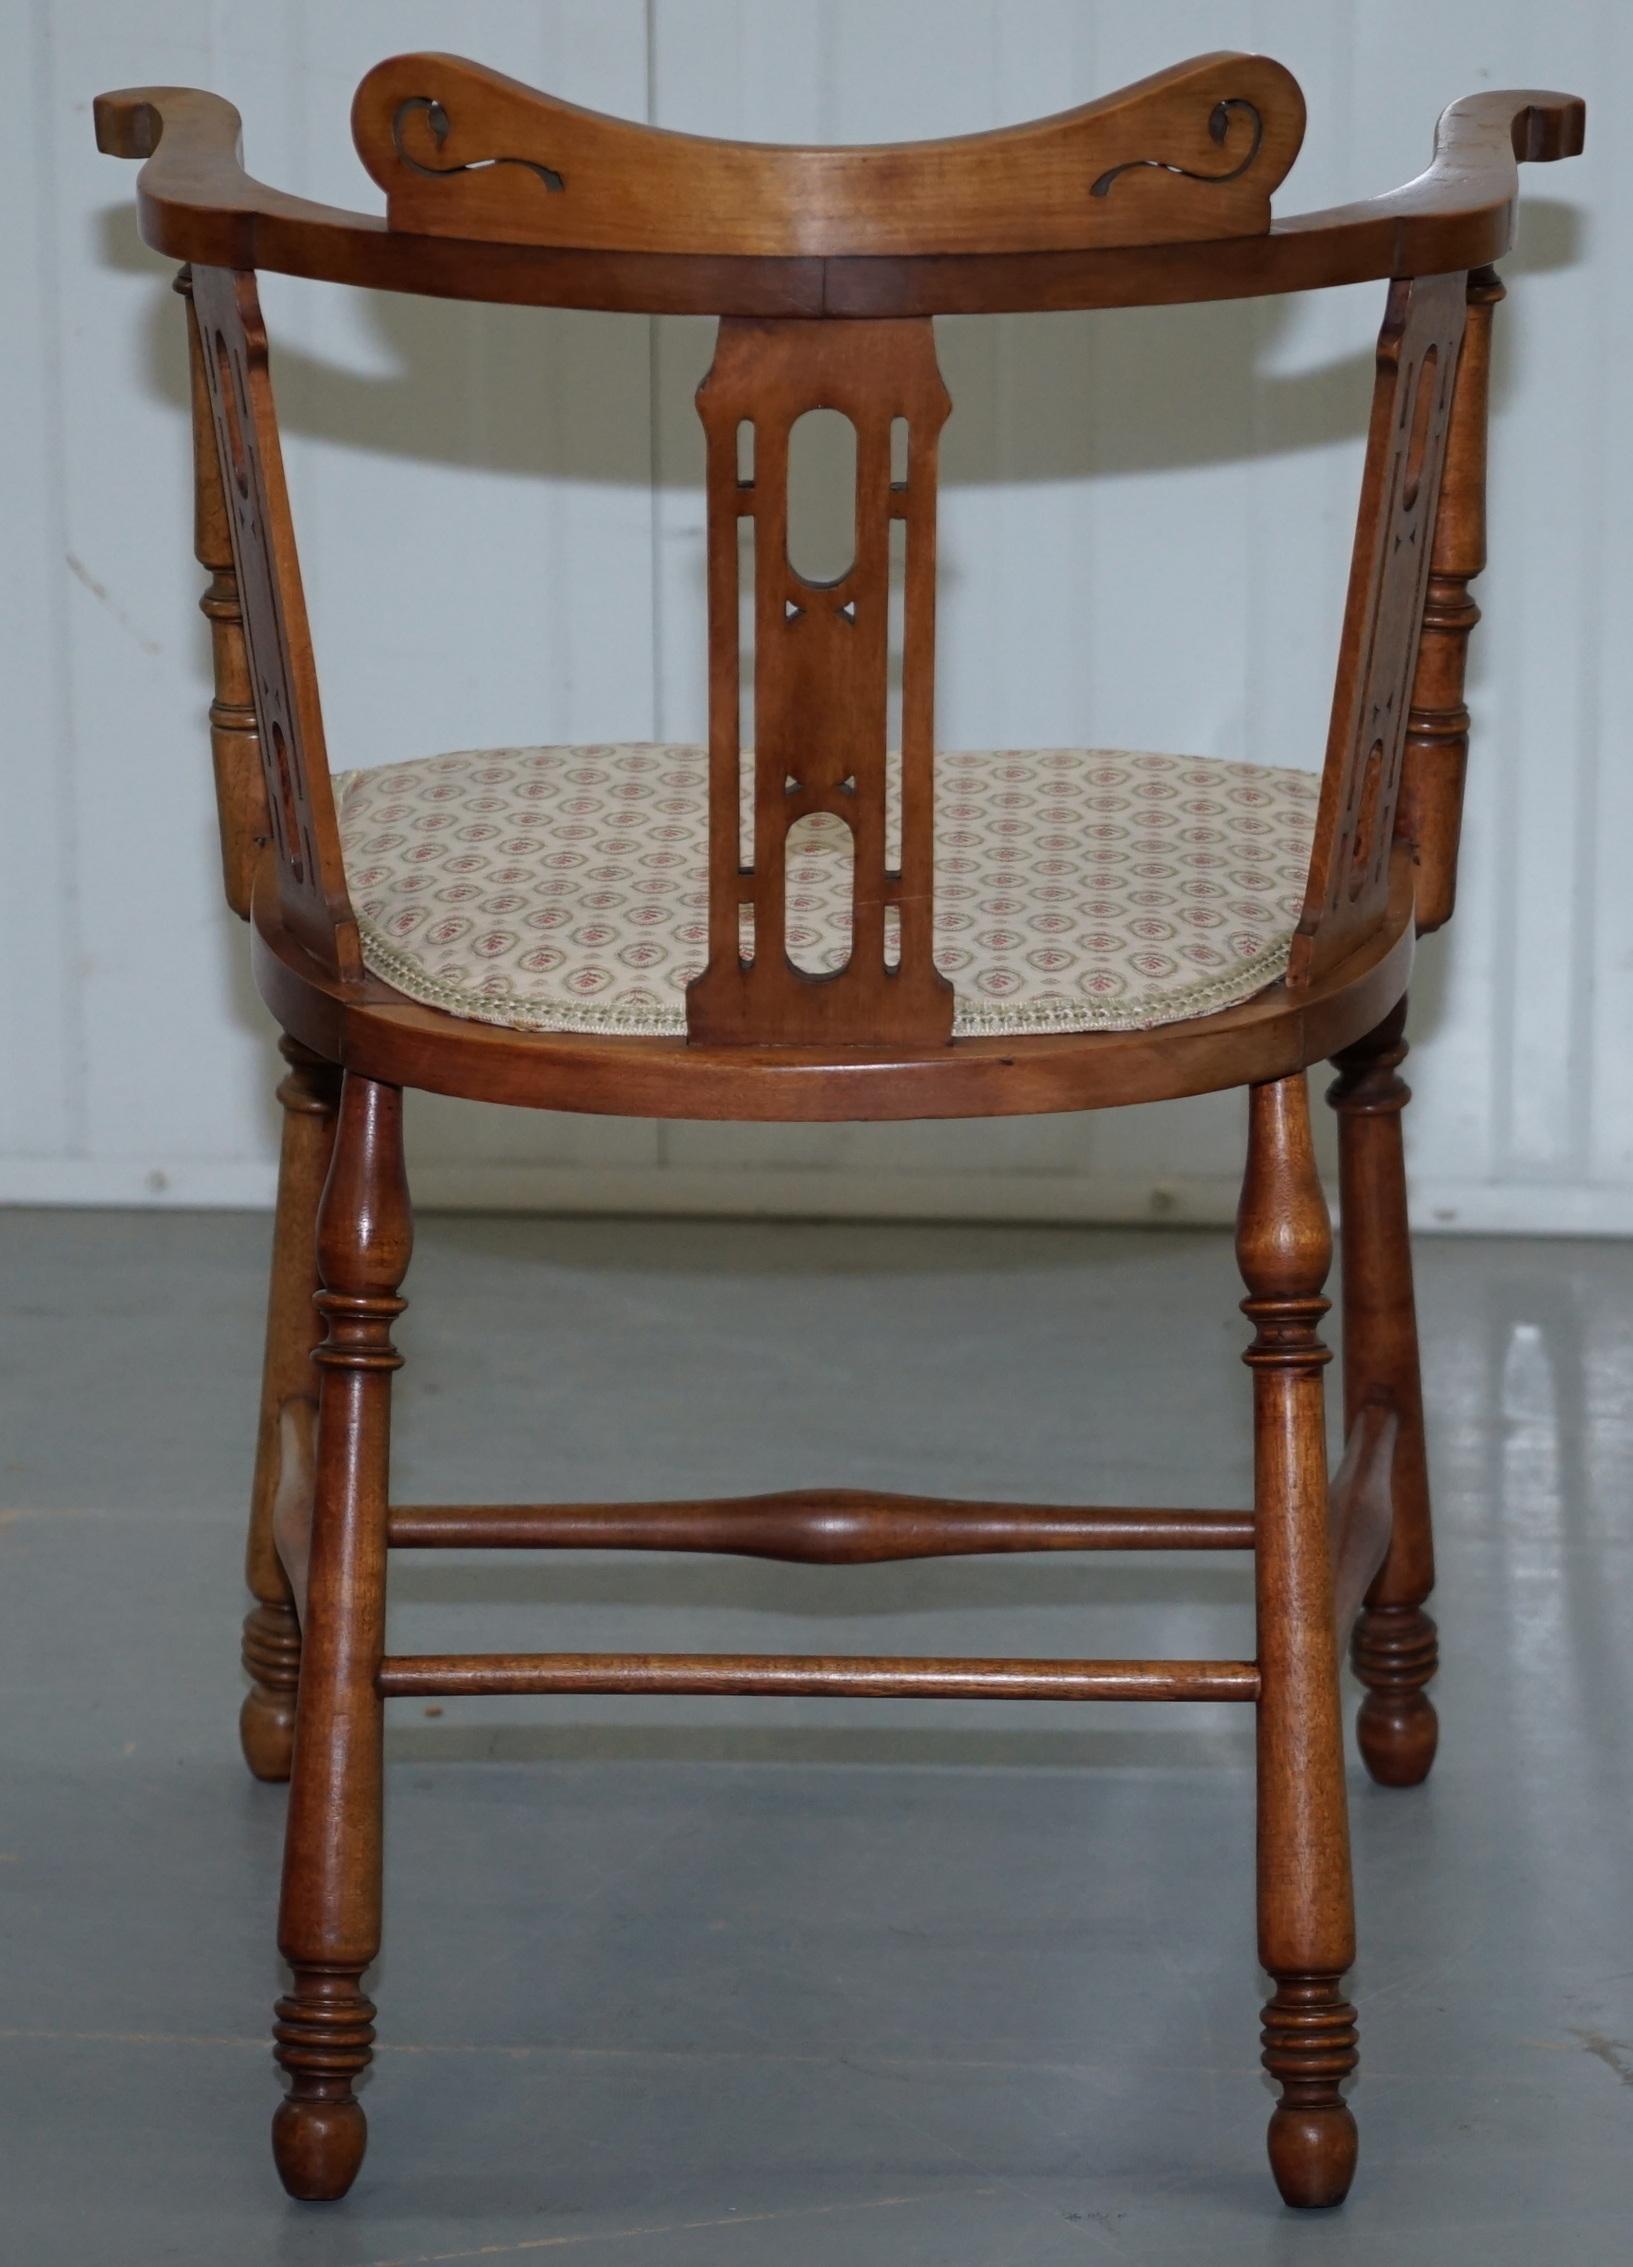 Stunning Edwardian Bow Back Walnut Chair Arts & Crafts Mother of Pearl Inlay For Sale 7